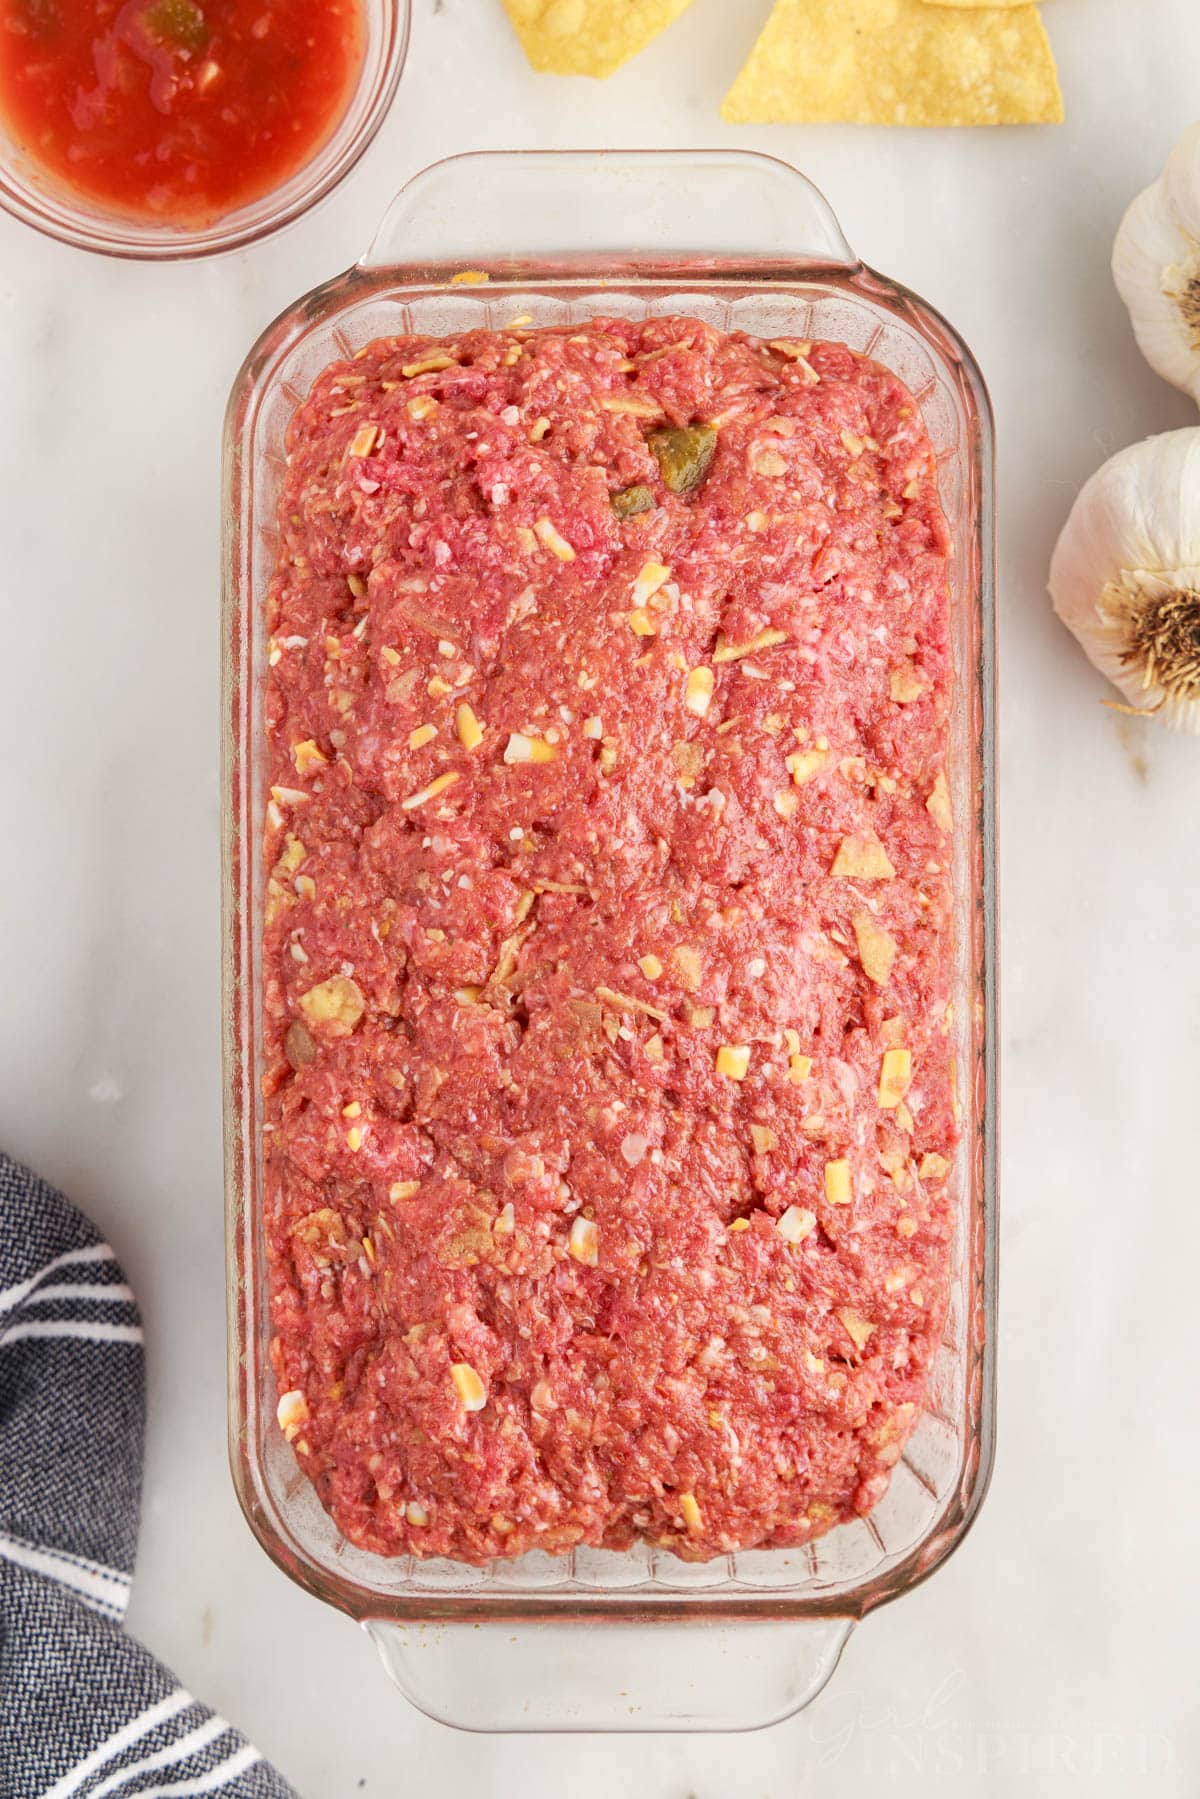 Meatloaf ingredients shaped into a loaf and placed into a glass loaf pan.